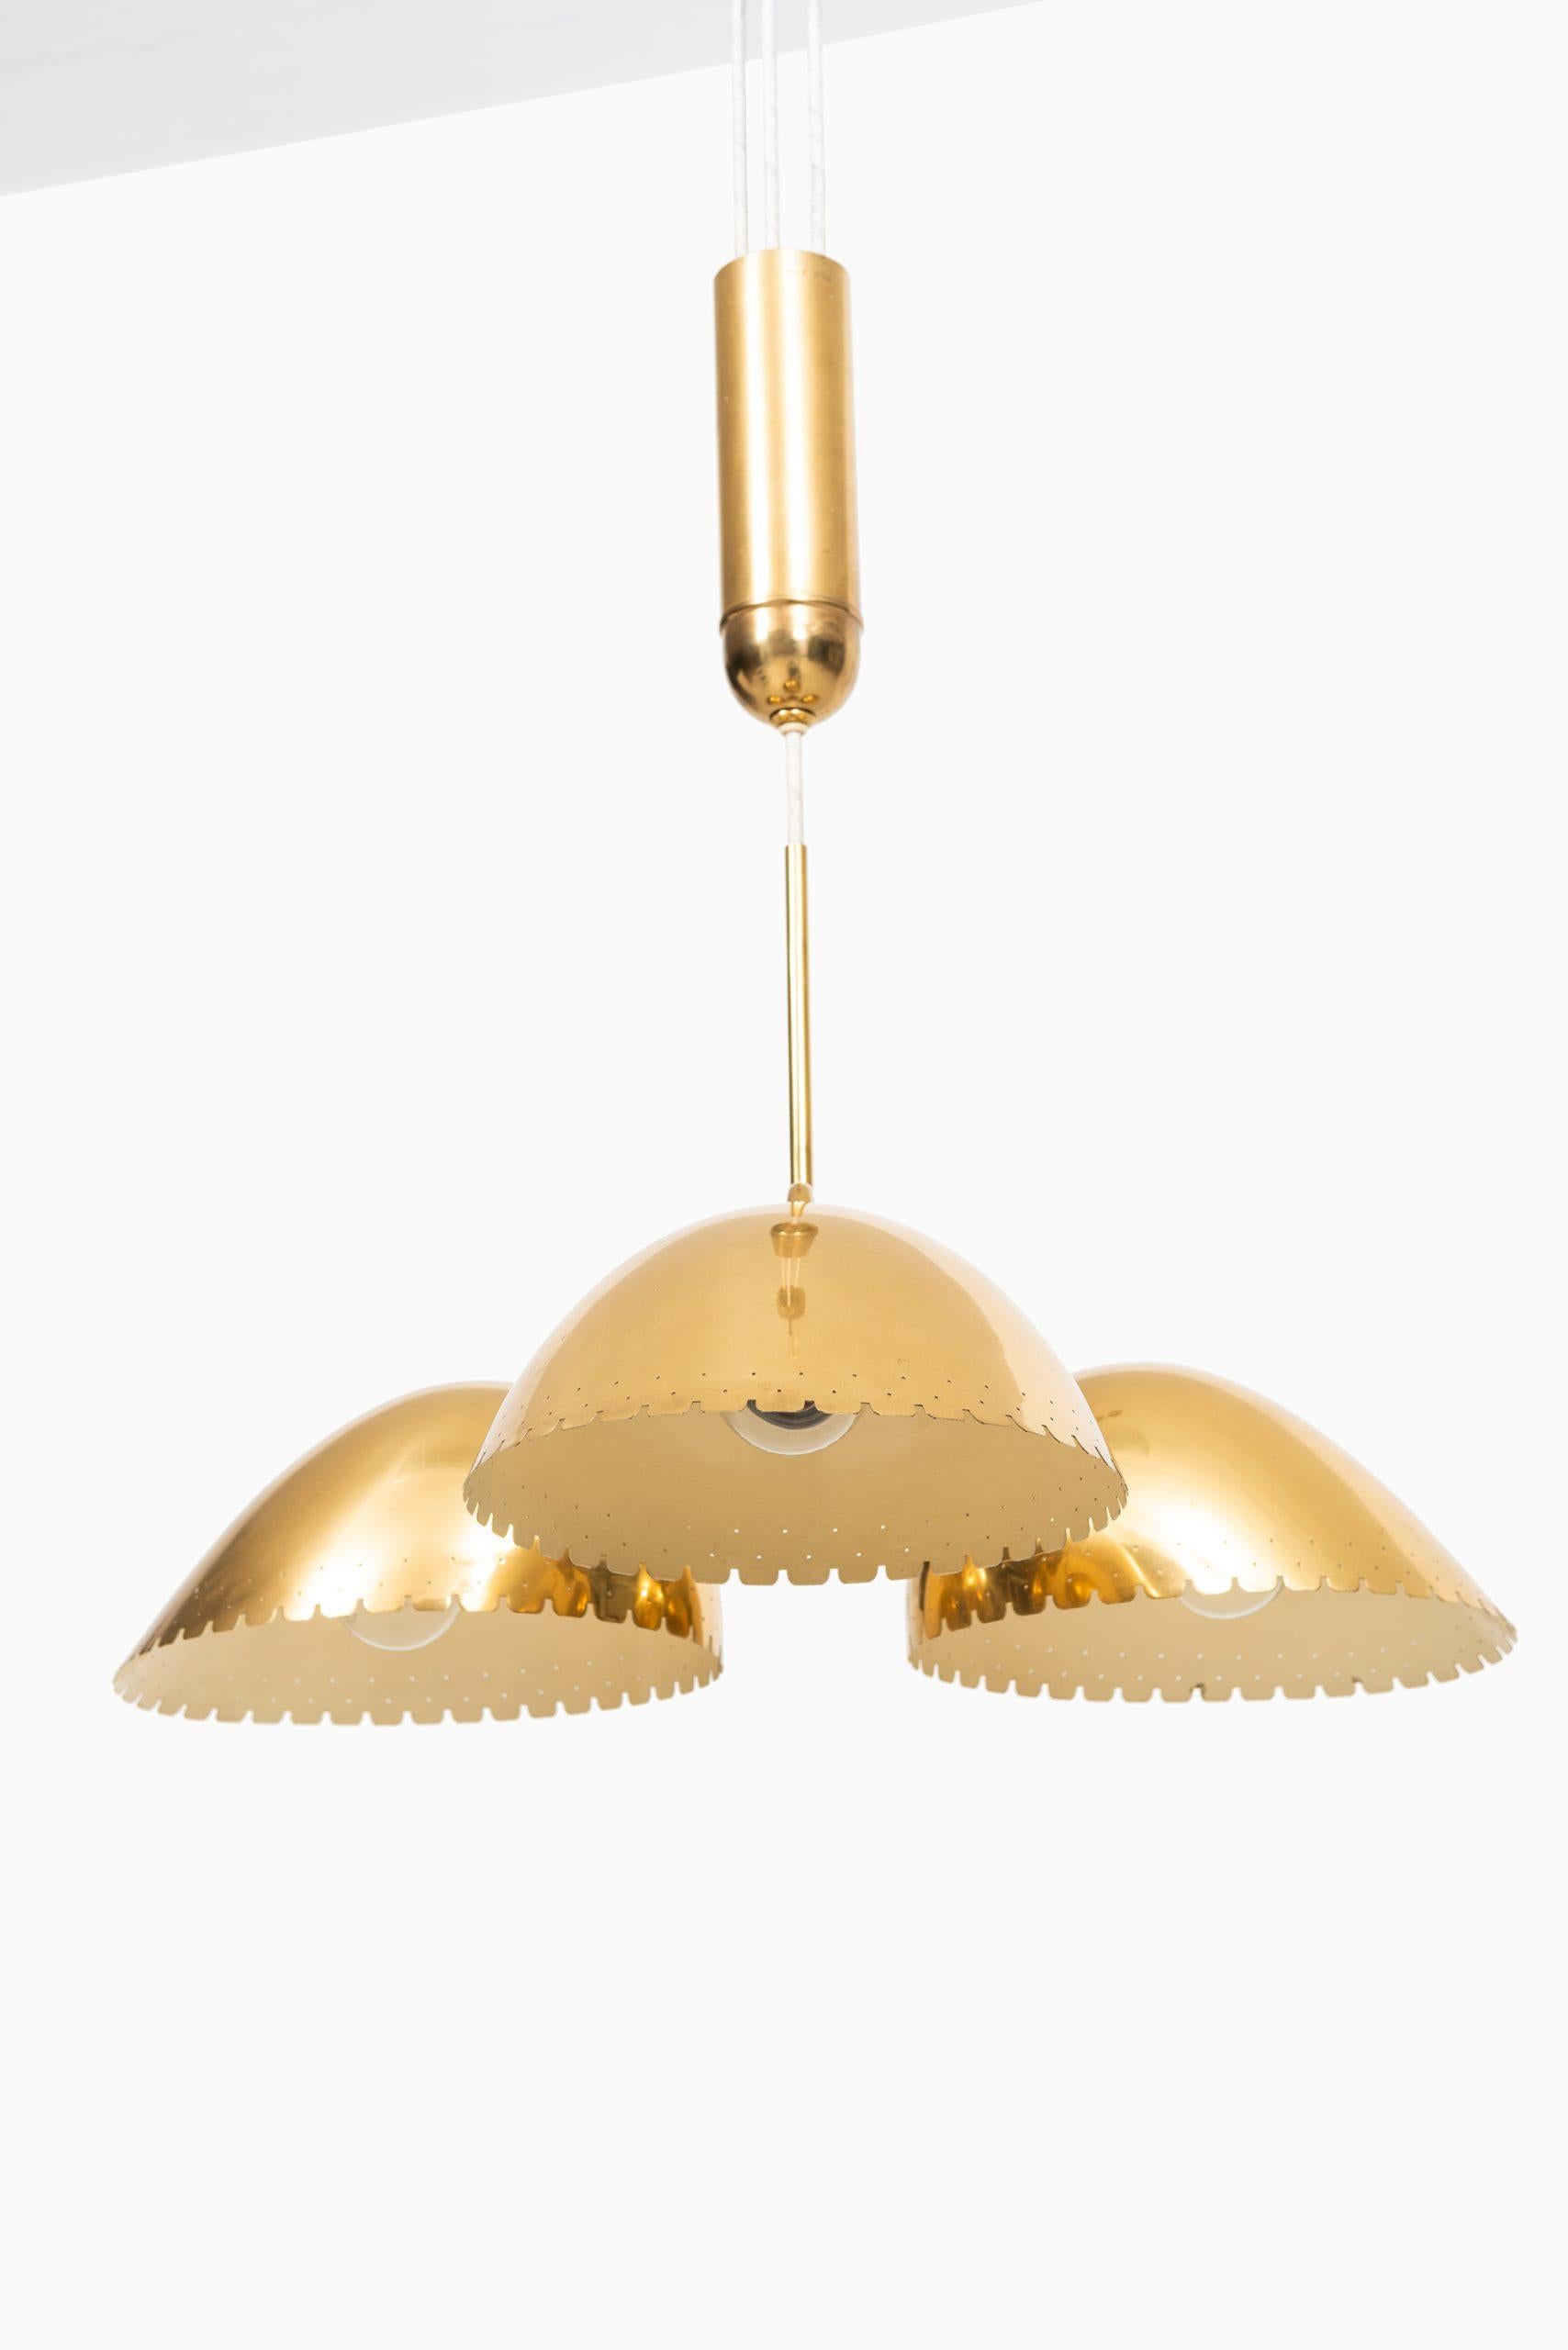 Swedish Ceiling Lamp Attributed to Carl-Axel Acking Produced by Böhlmarks in Sweden For Sale